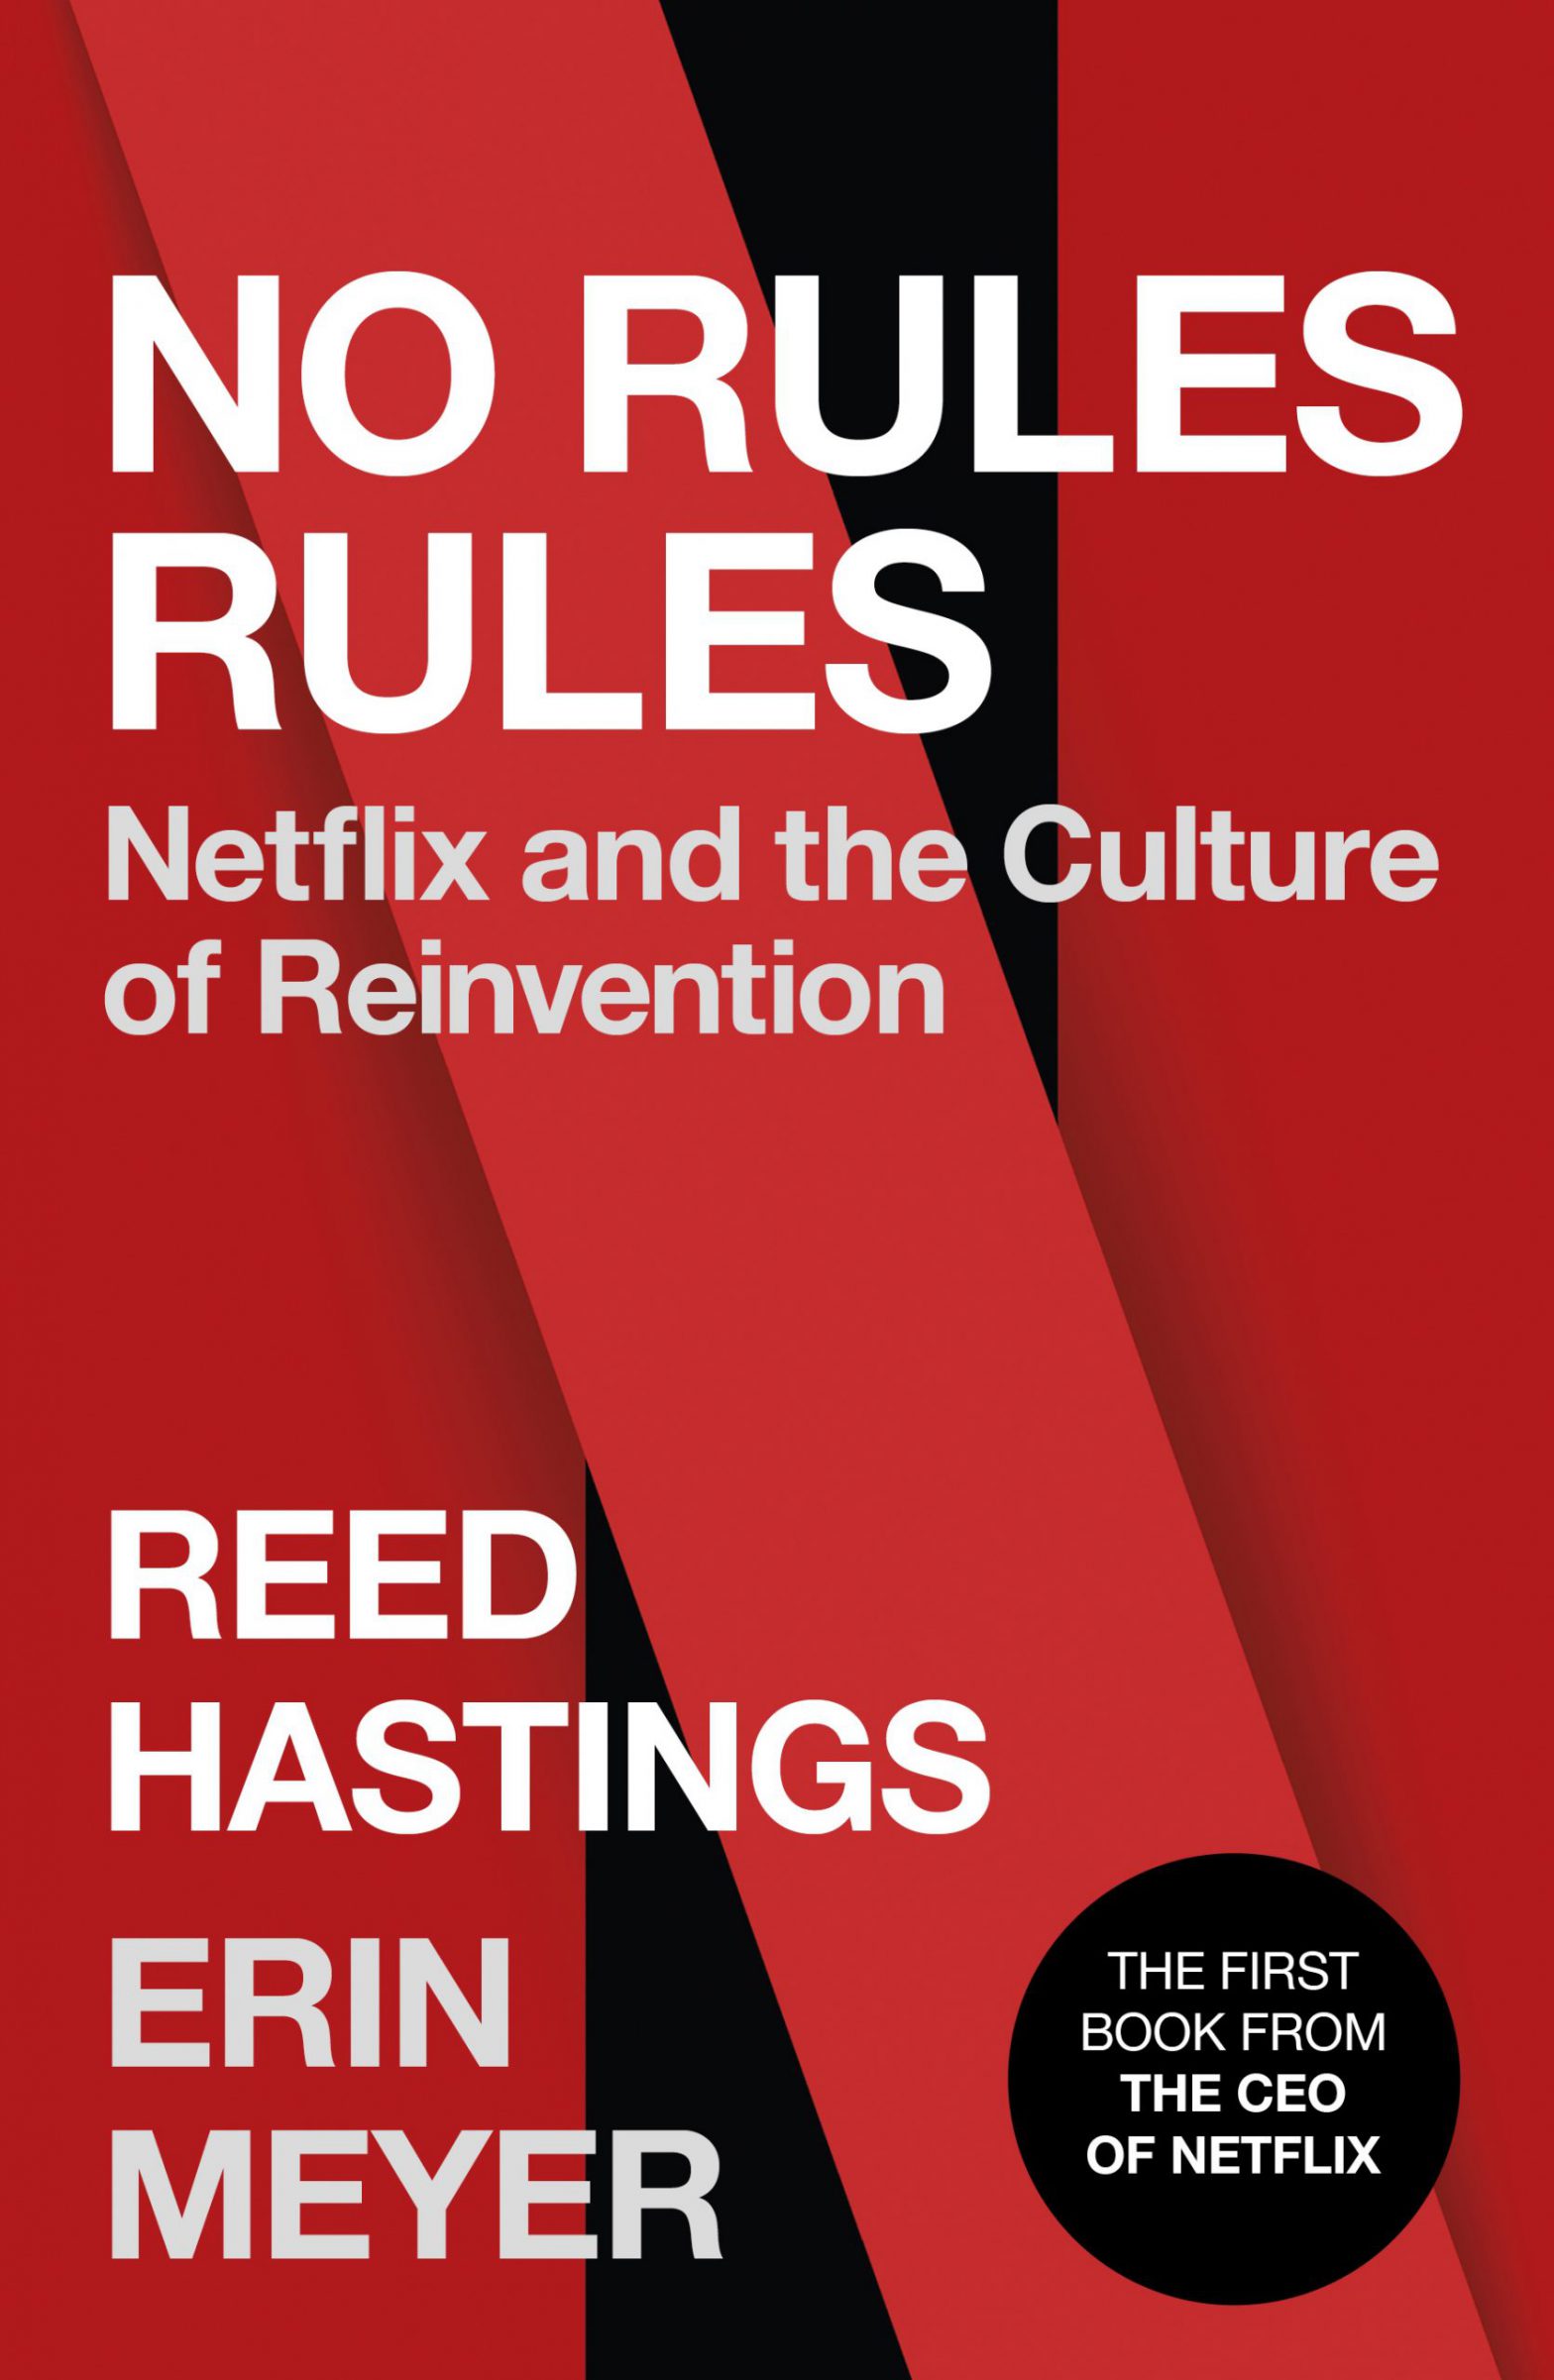 No Rules rules Reed hastings